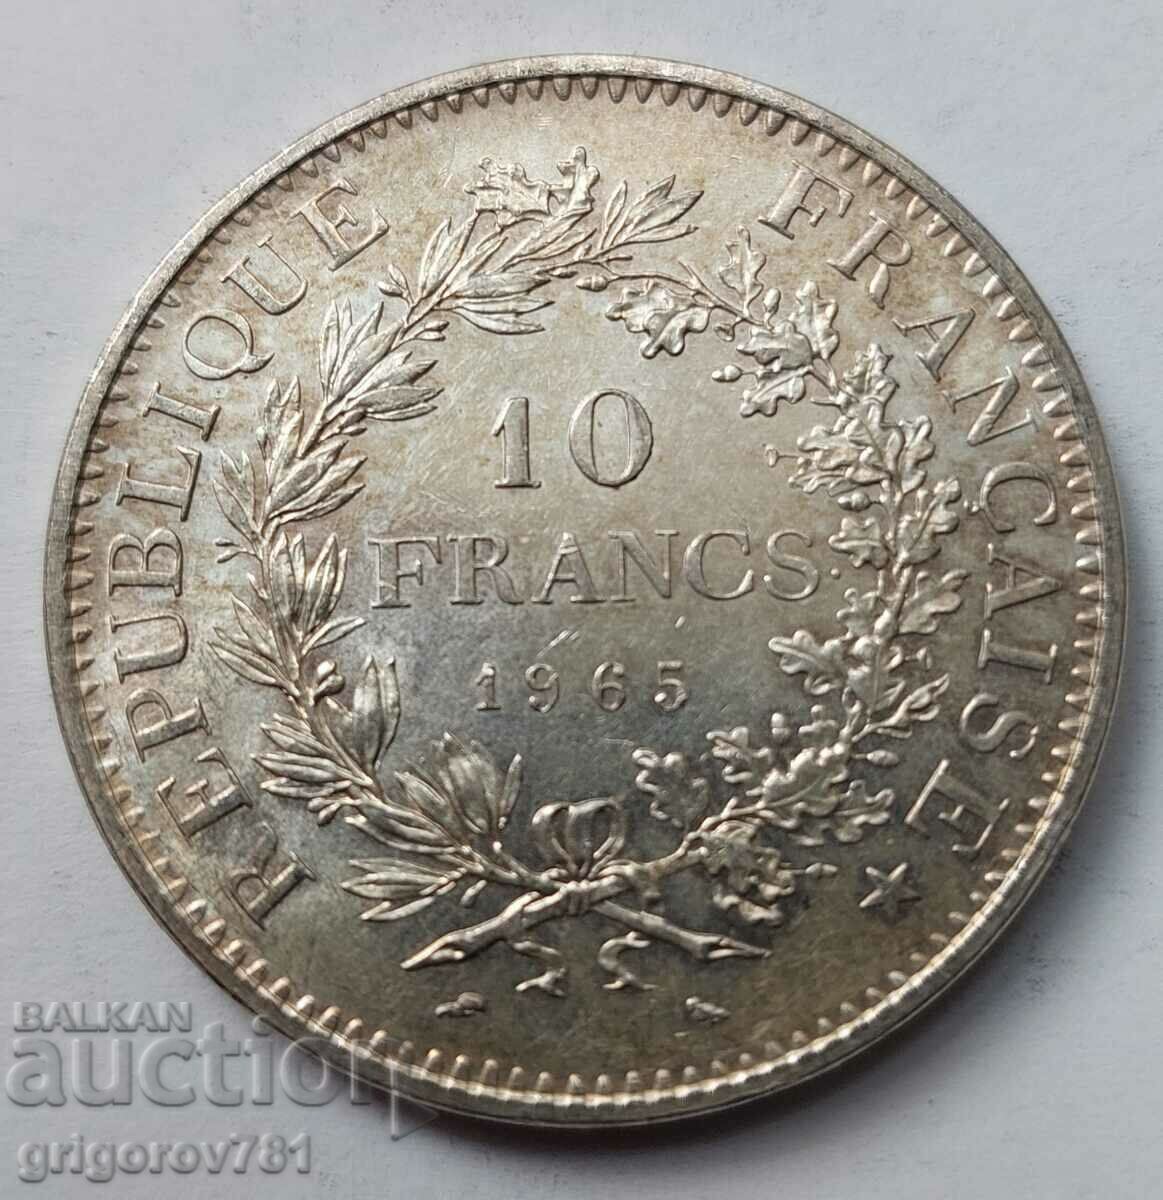 10 Francs Silver France 1965 - Silver Coin #50